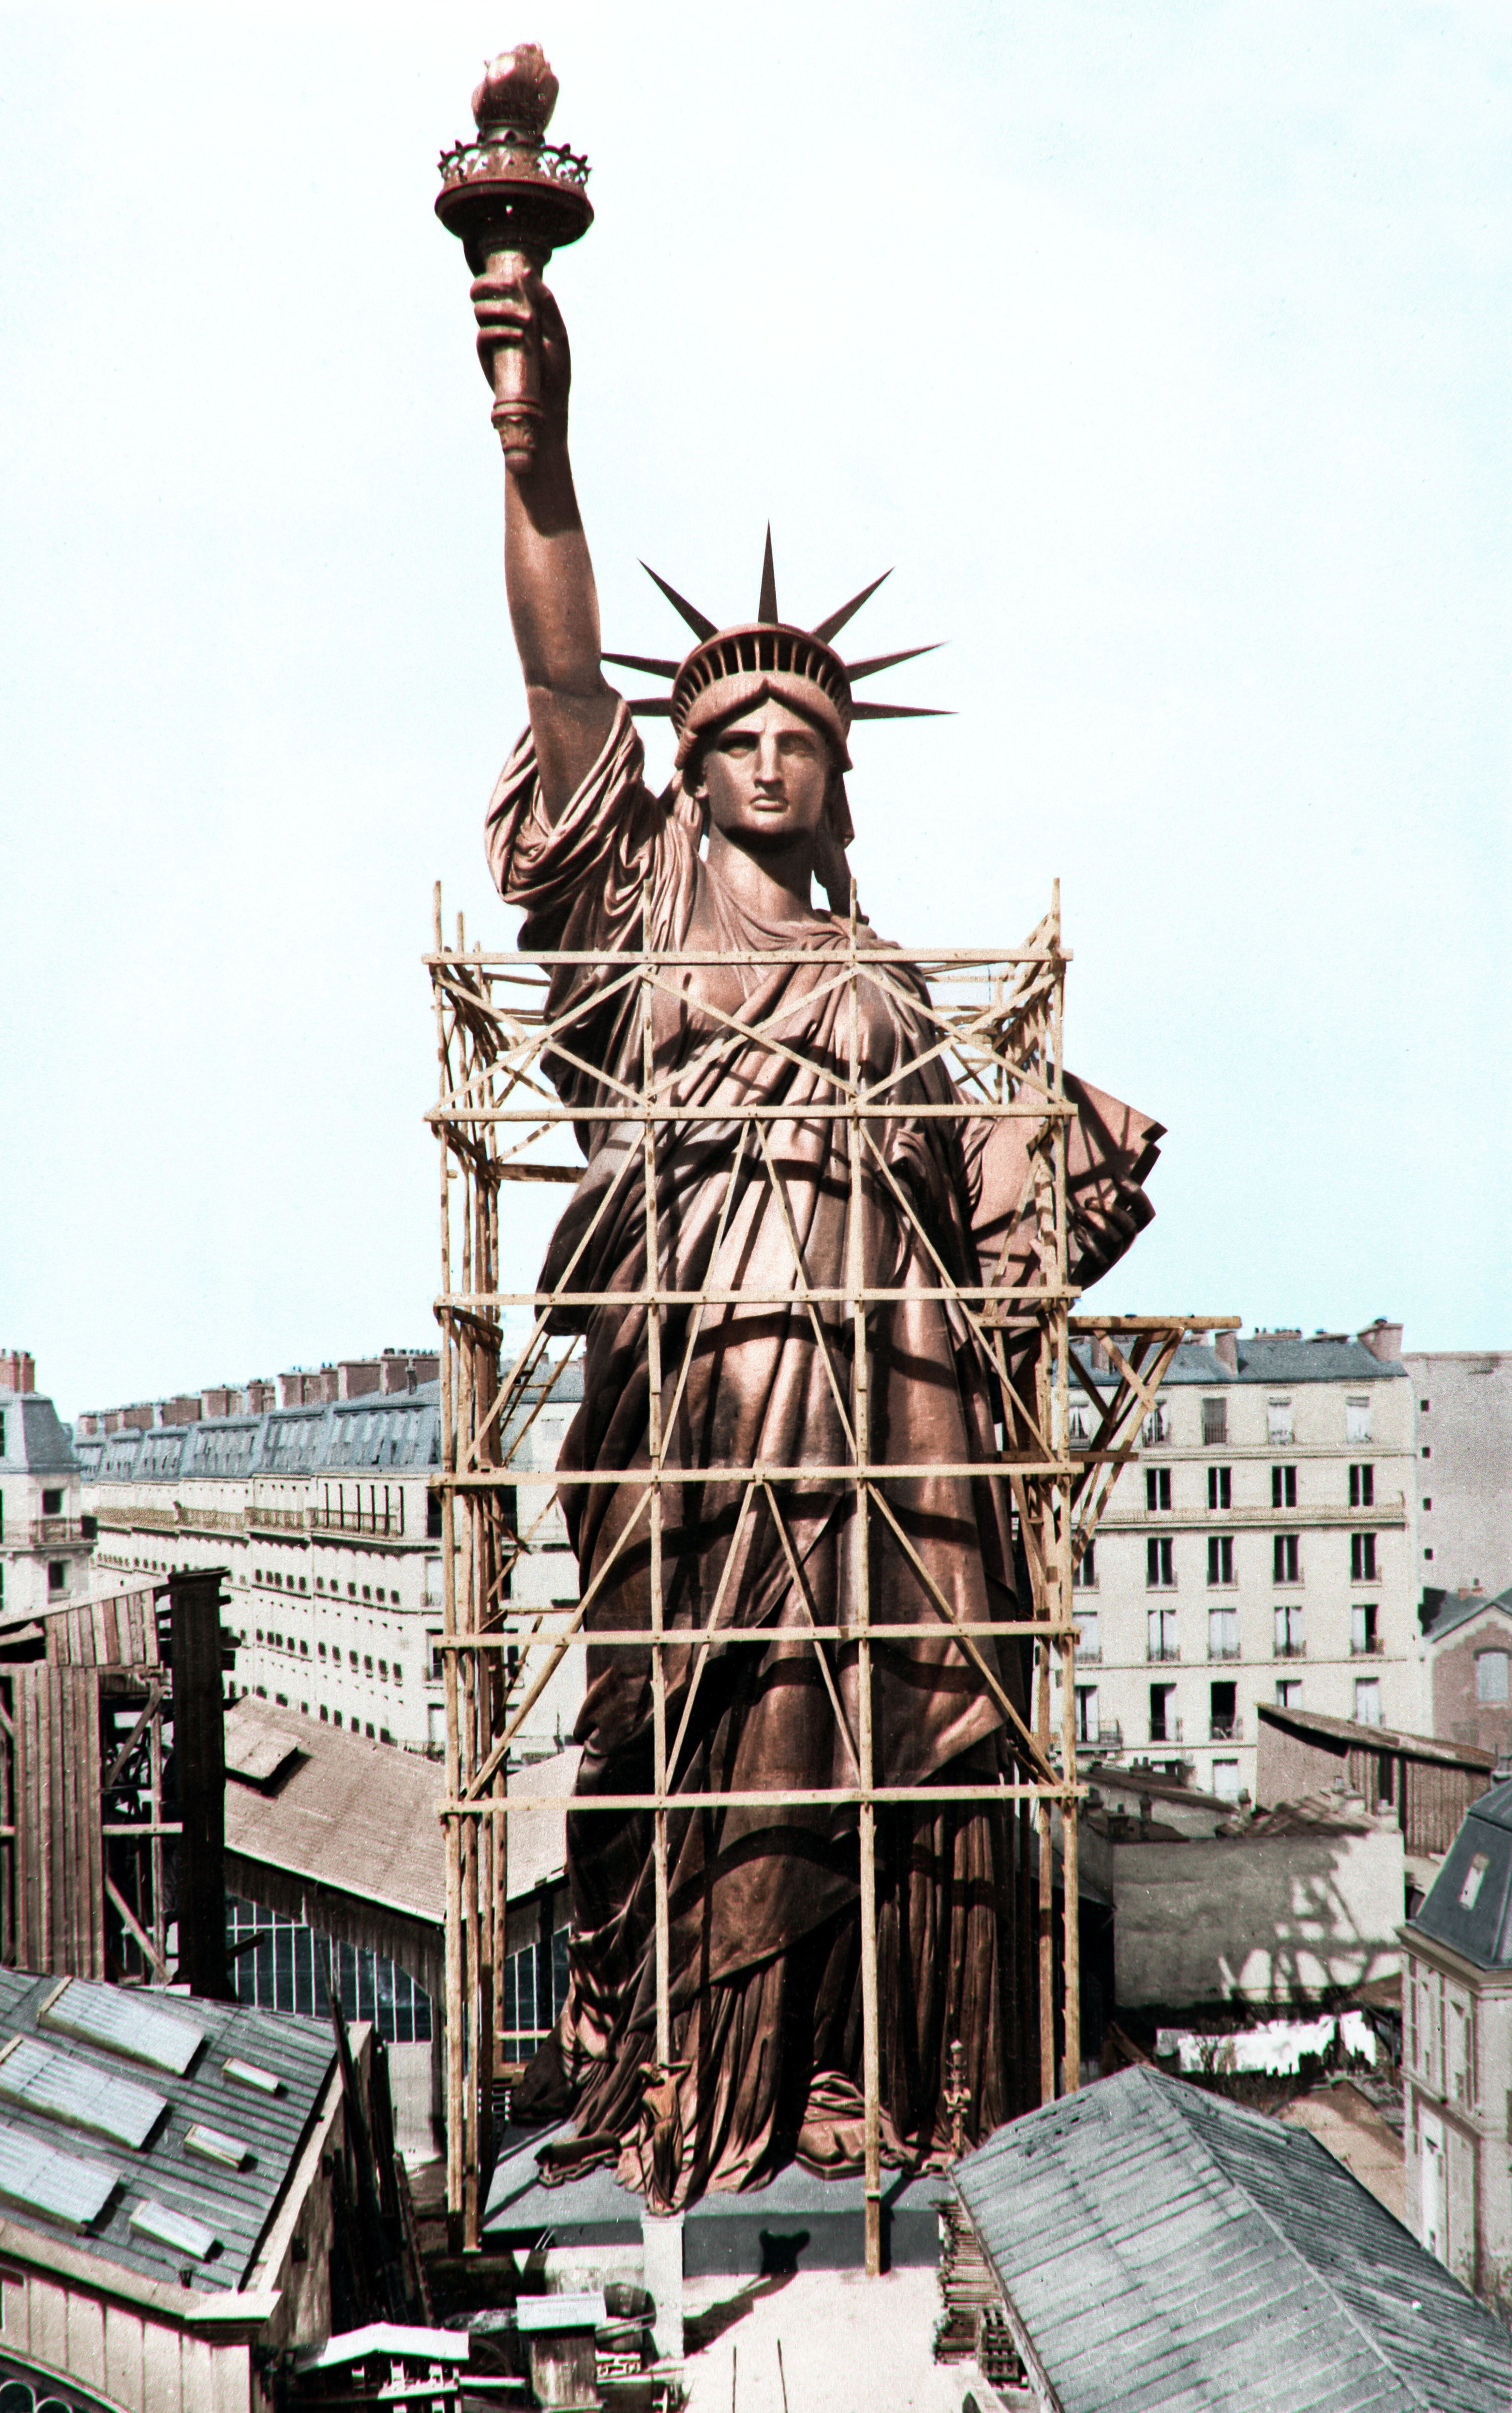 The Statue of Liberty under construction